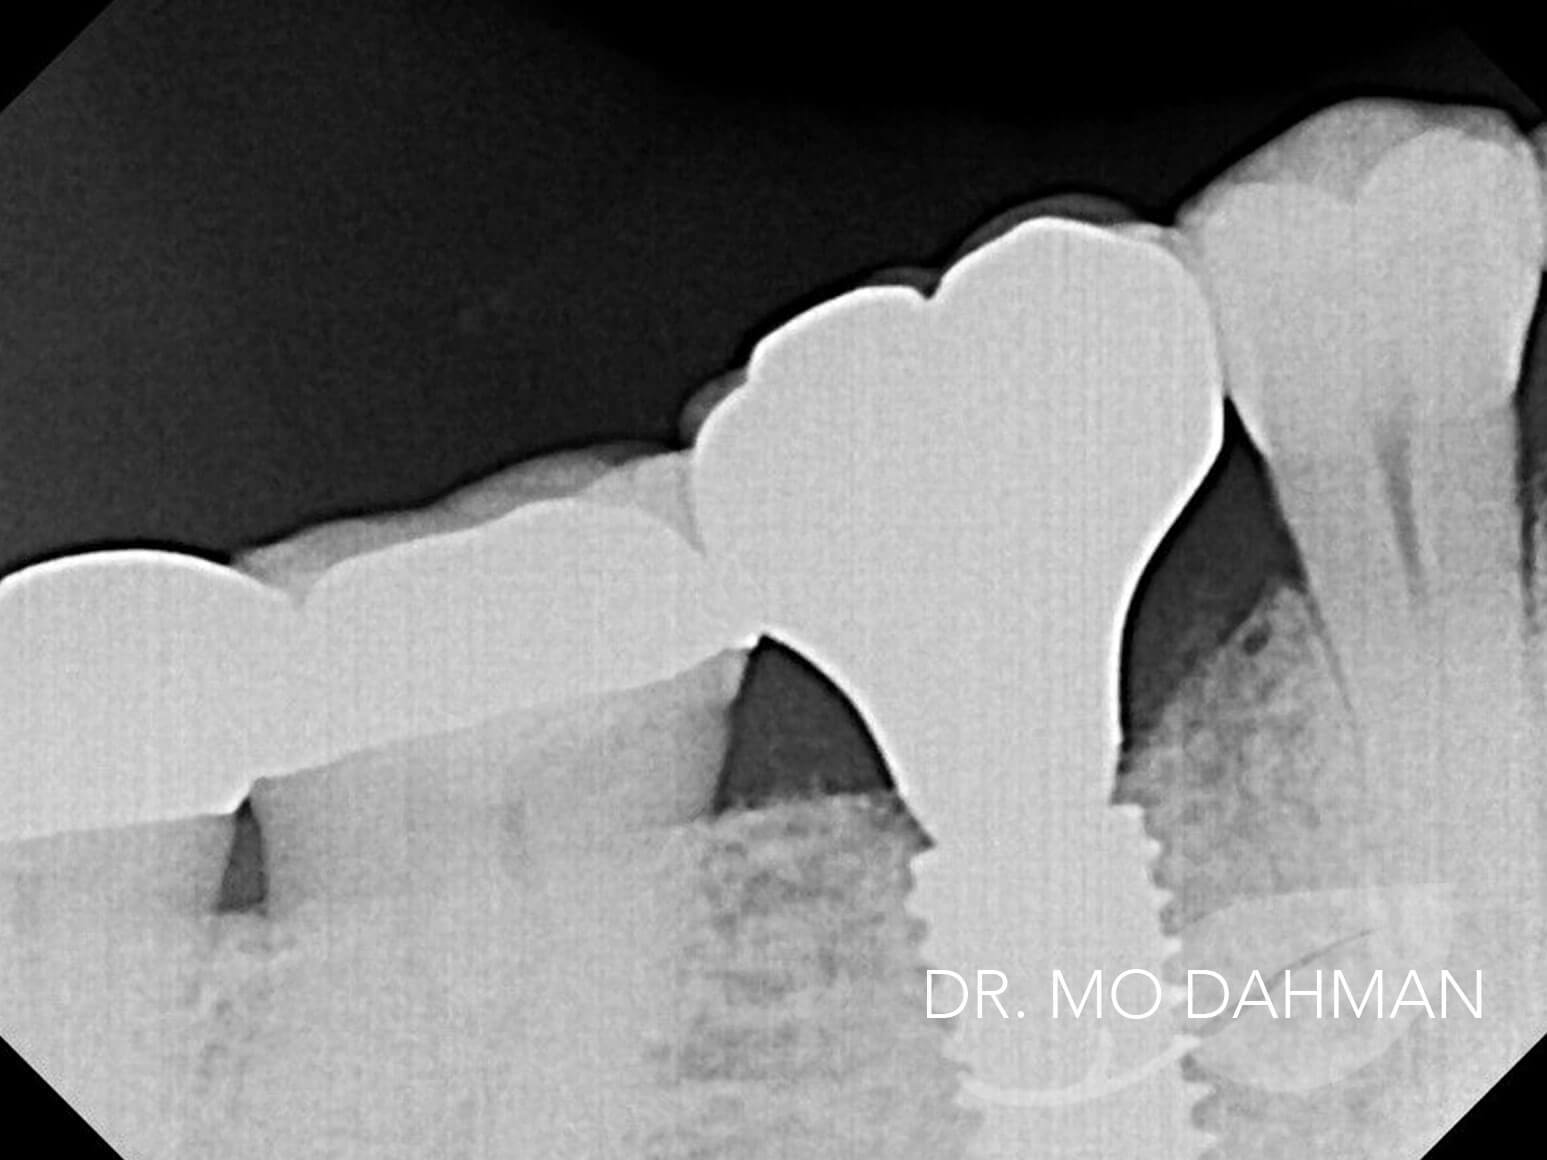 Case 02 xray after